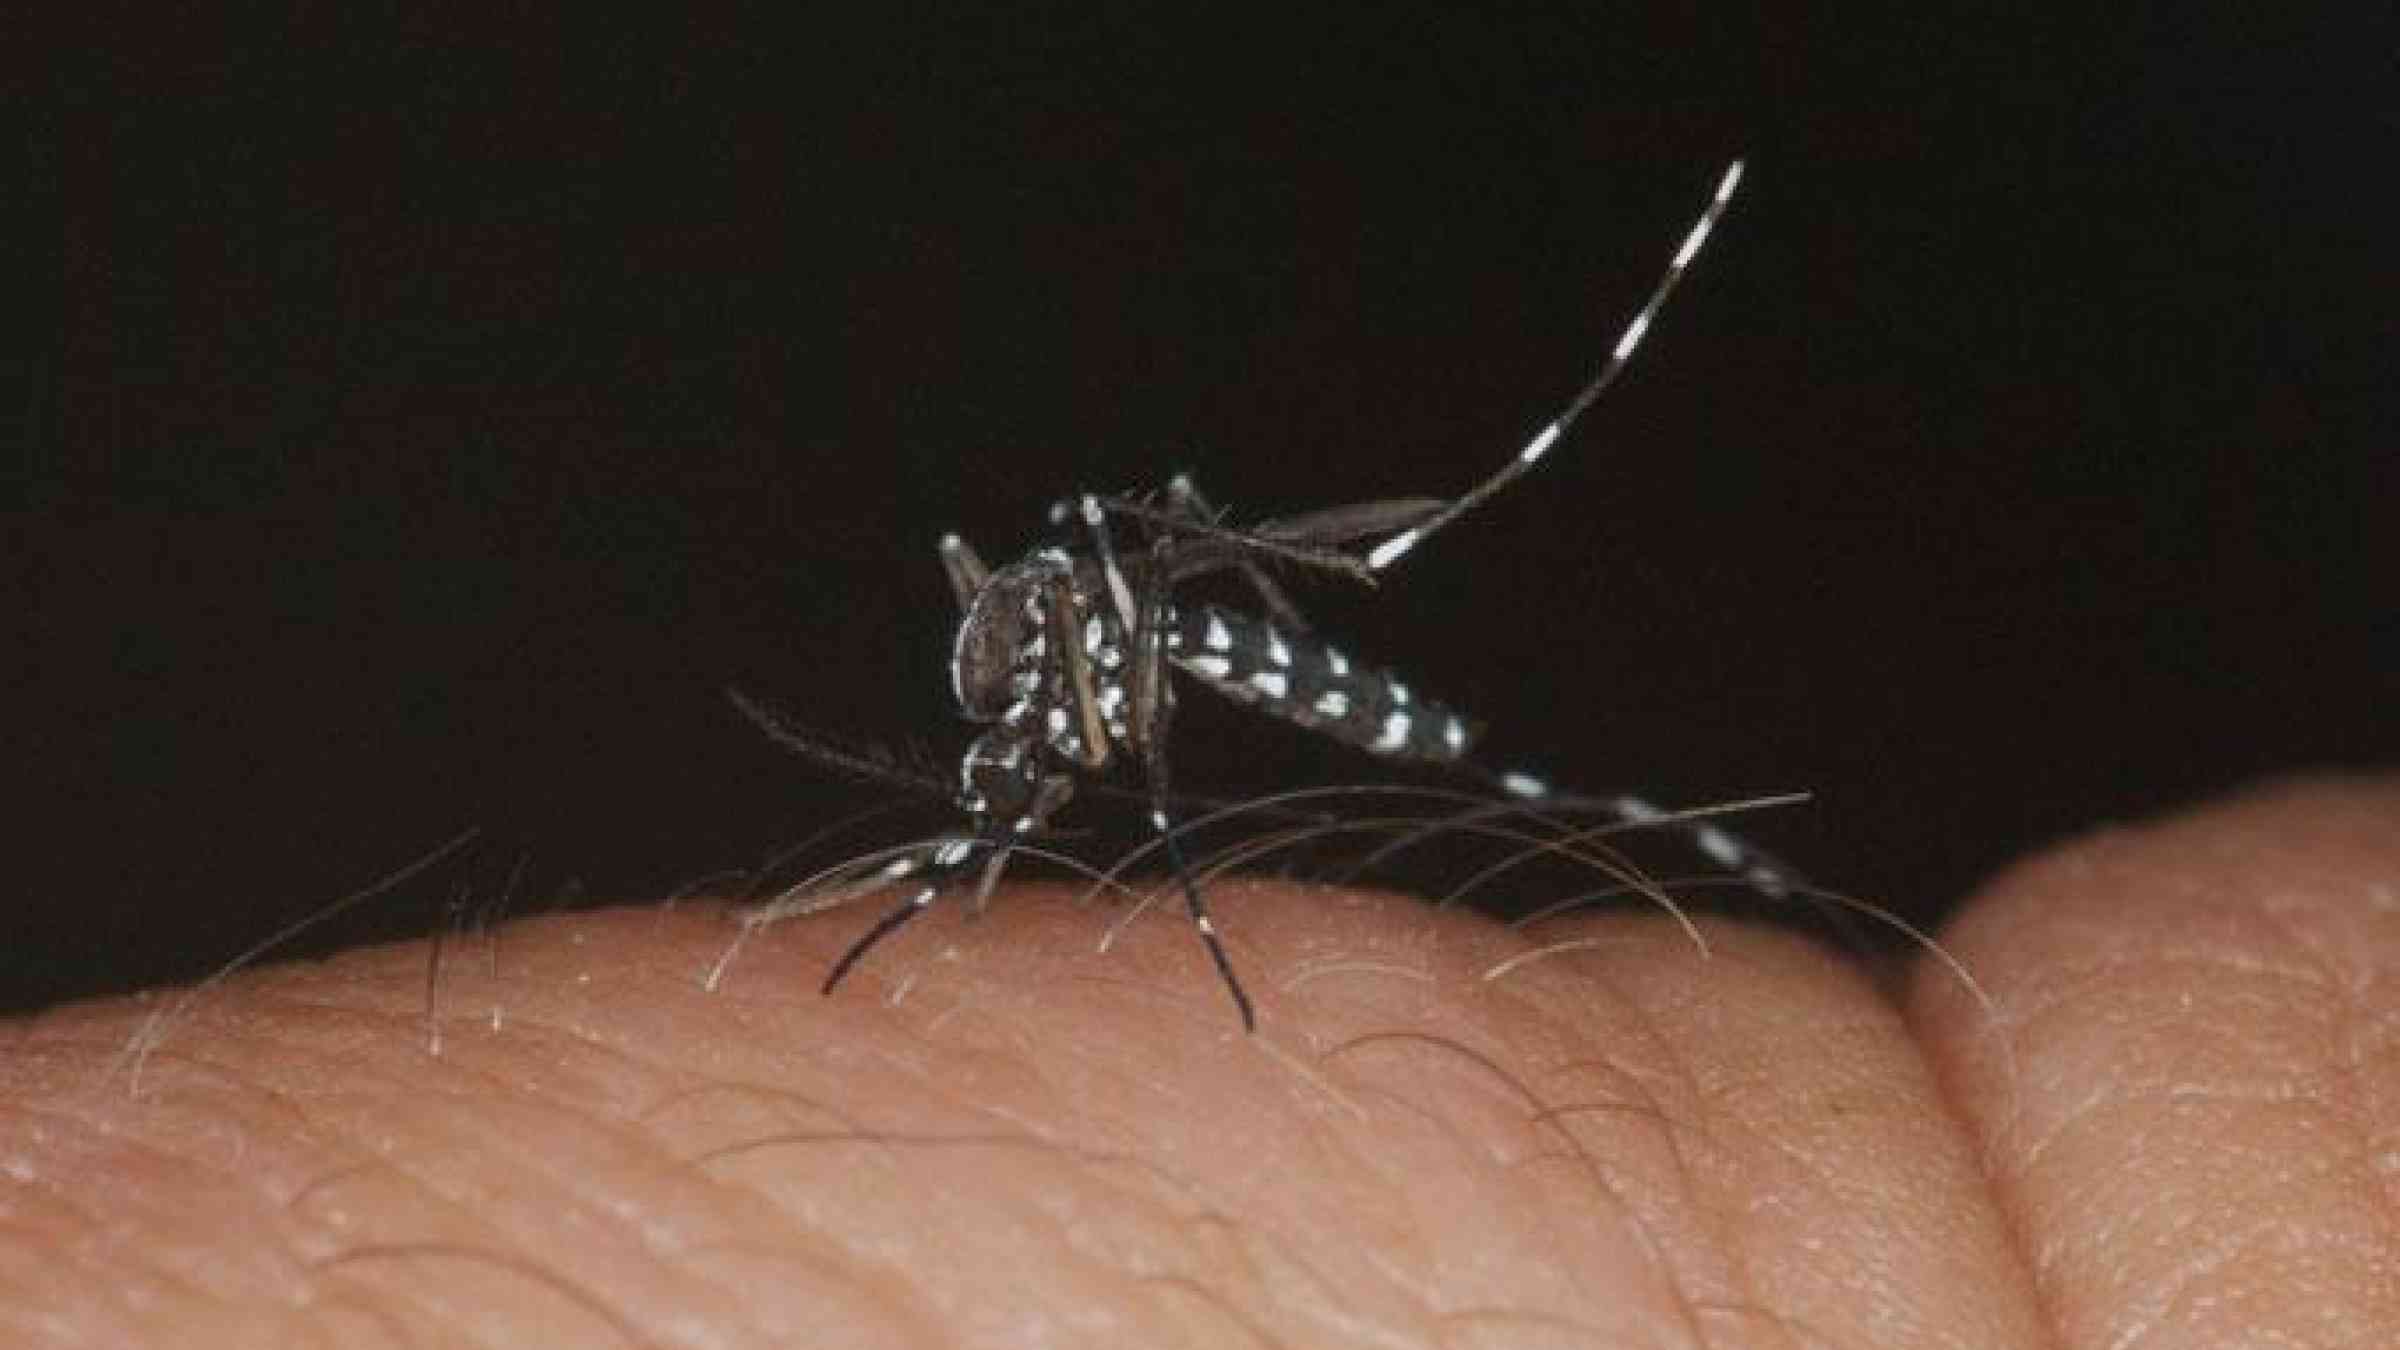 Aedes mosquito. Photo by Flickr user AFPMB CC BY 2.0 https://flic.kr/p/8uPugf